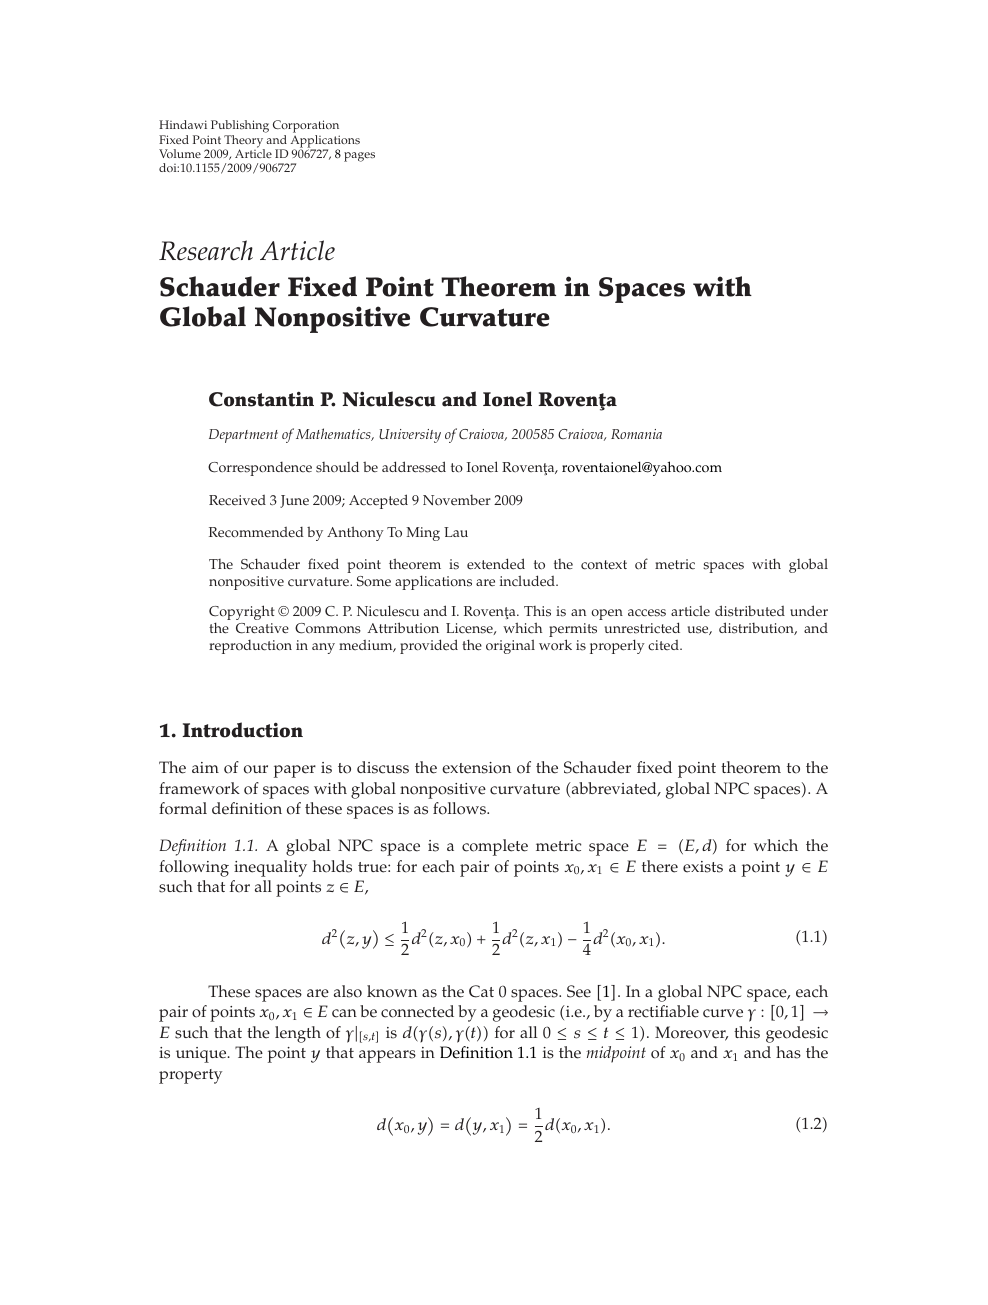 Schauder Fixed Point Theorem In Spaces With Global Nonpositive Curvature Topic Of Research Paper In Mathematics Download Scholarly Article Pdf And Read For Free On Cyberleninka Open Science Hub